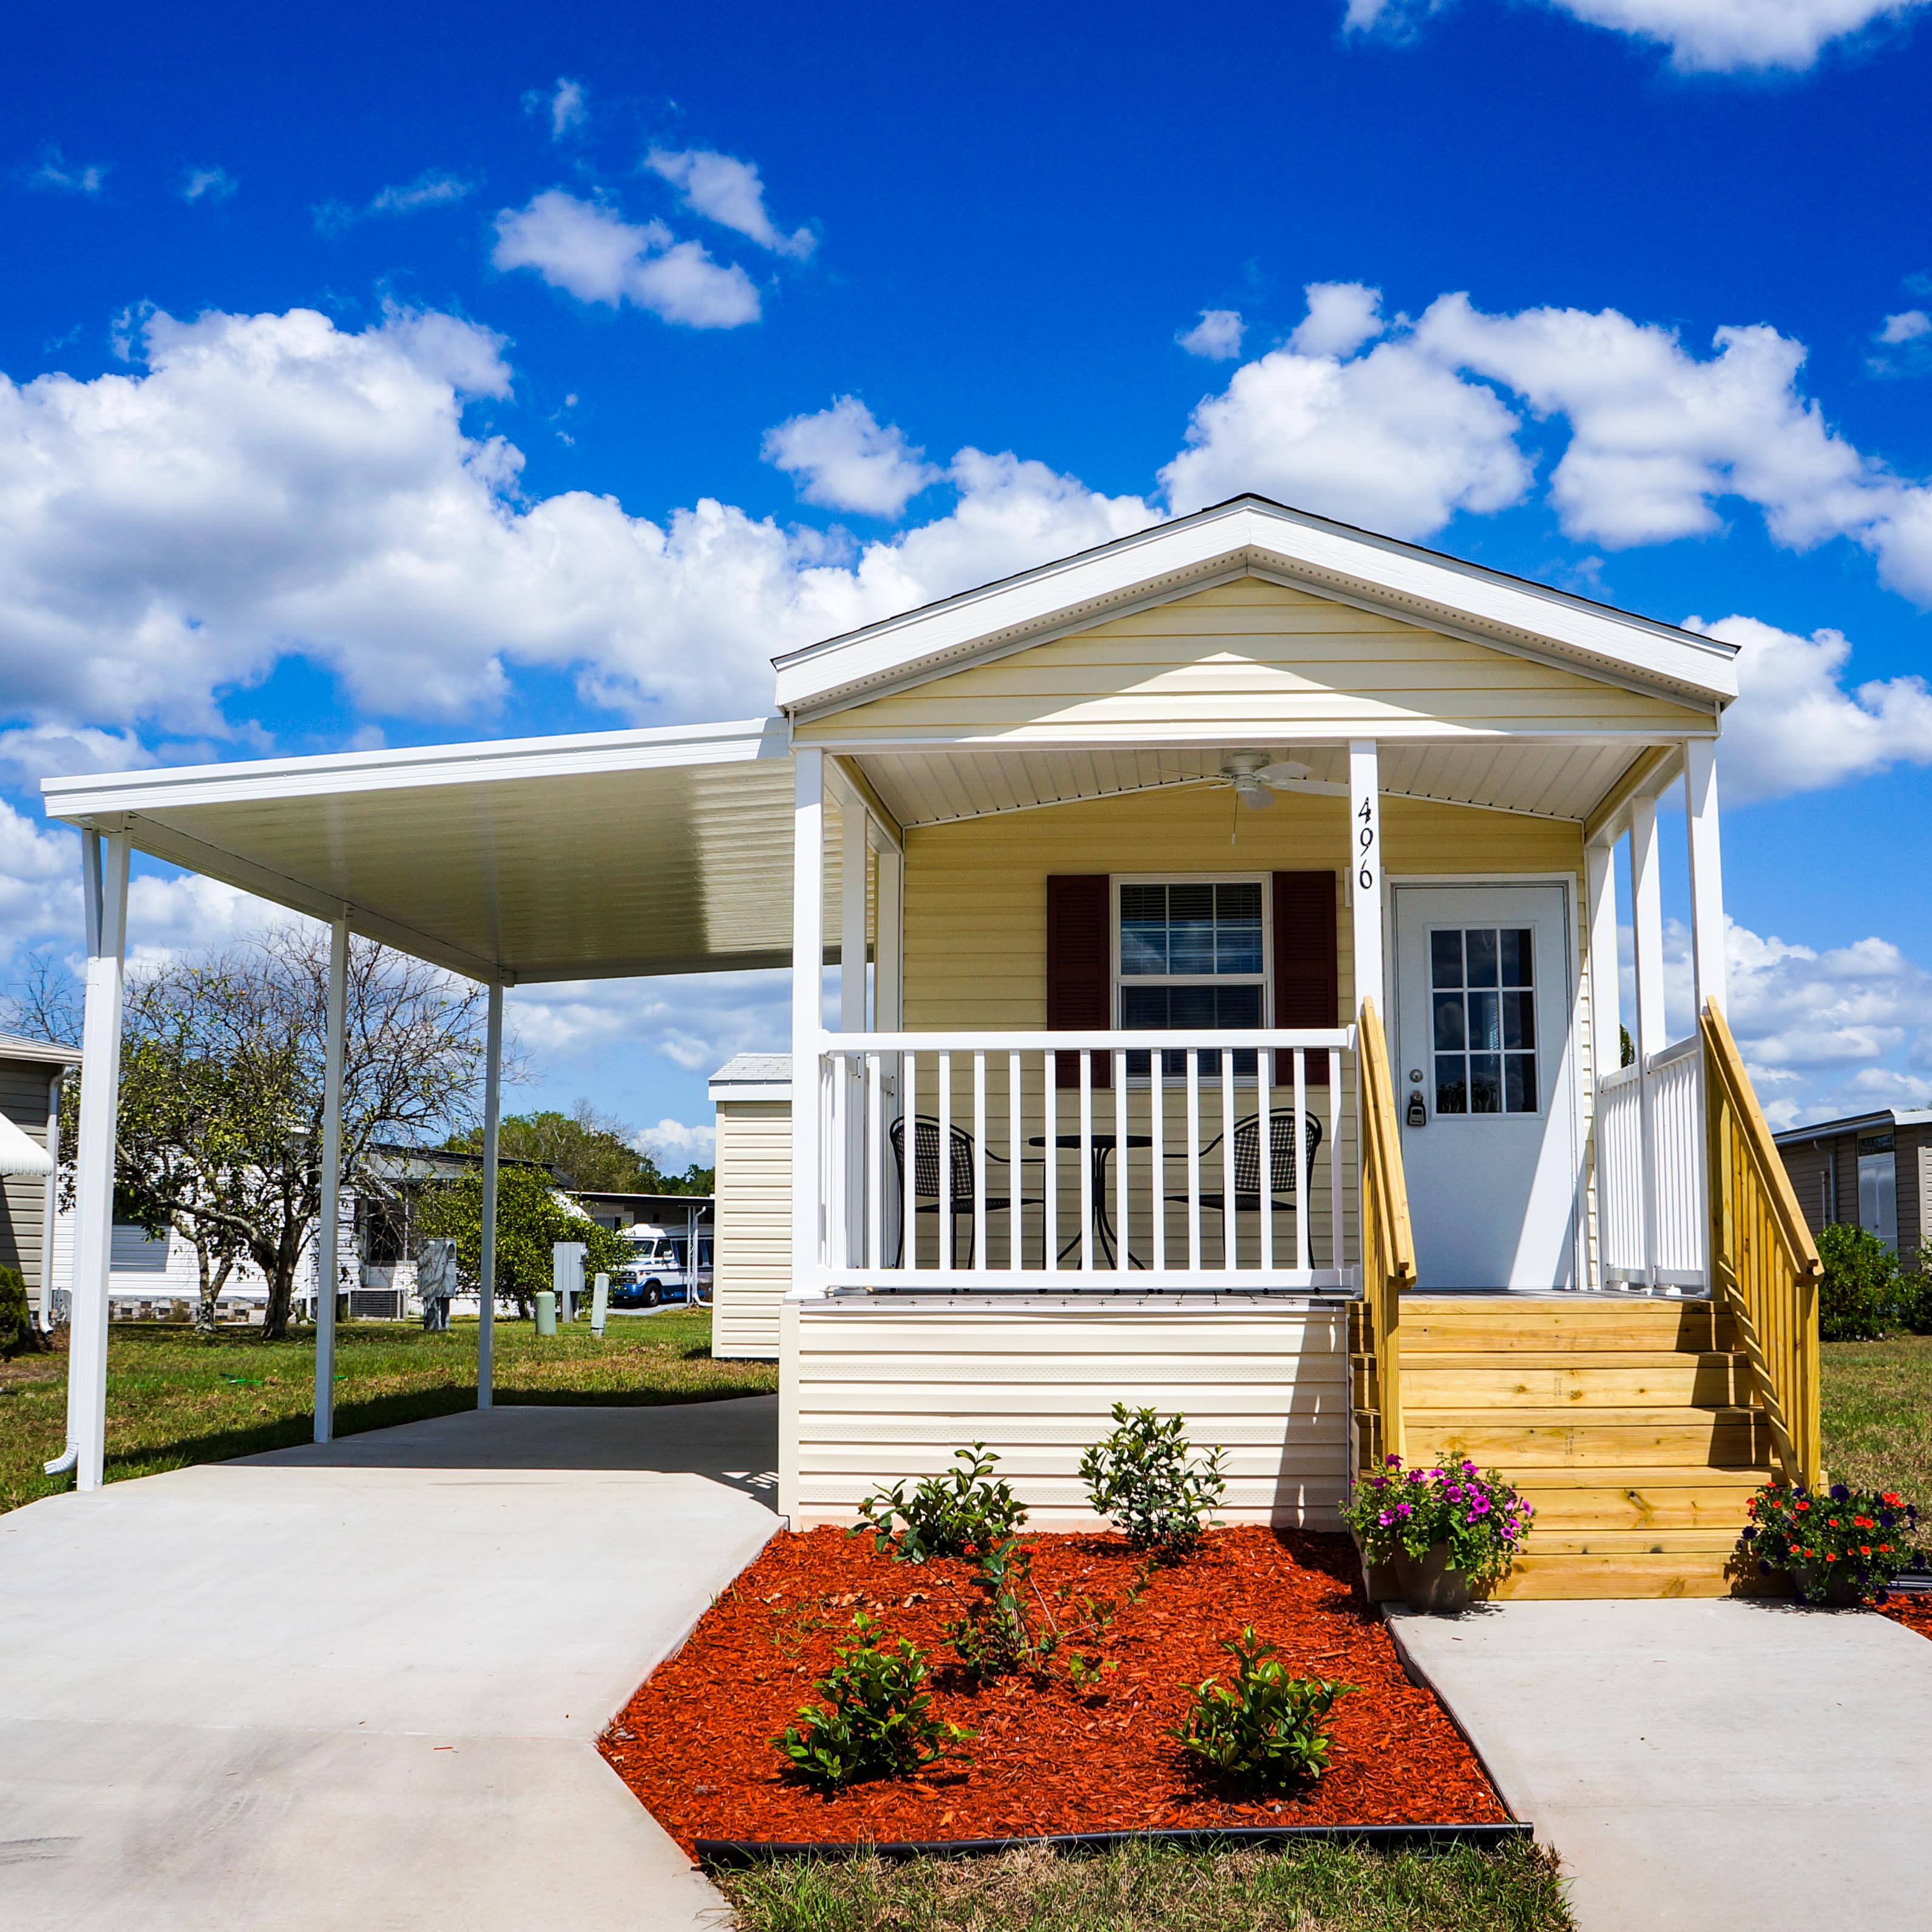 How Much Does It Cost to Rent a Mobile Home?